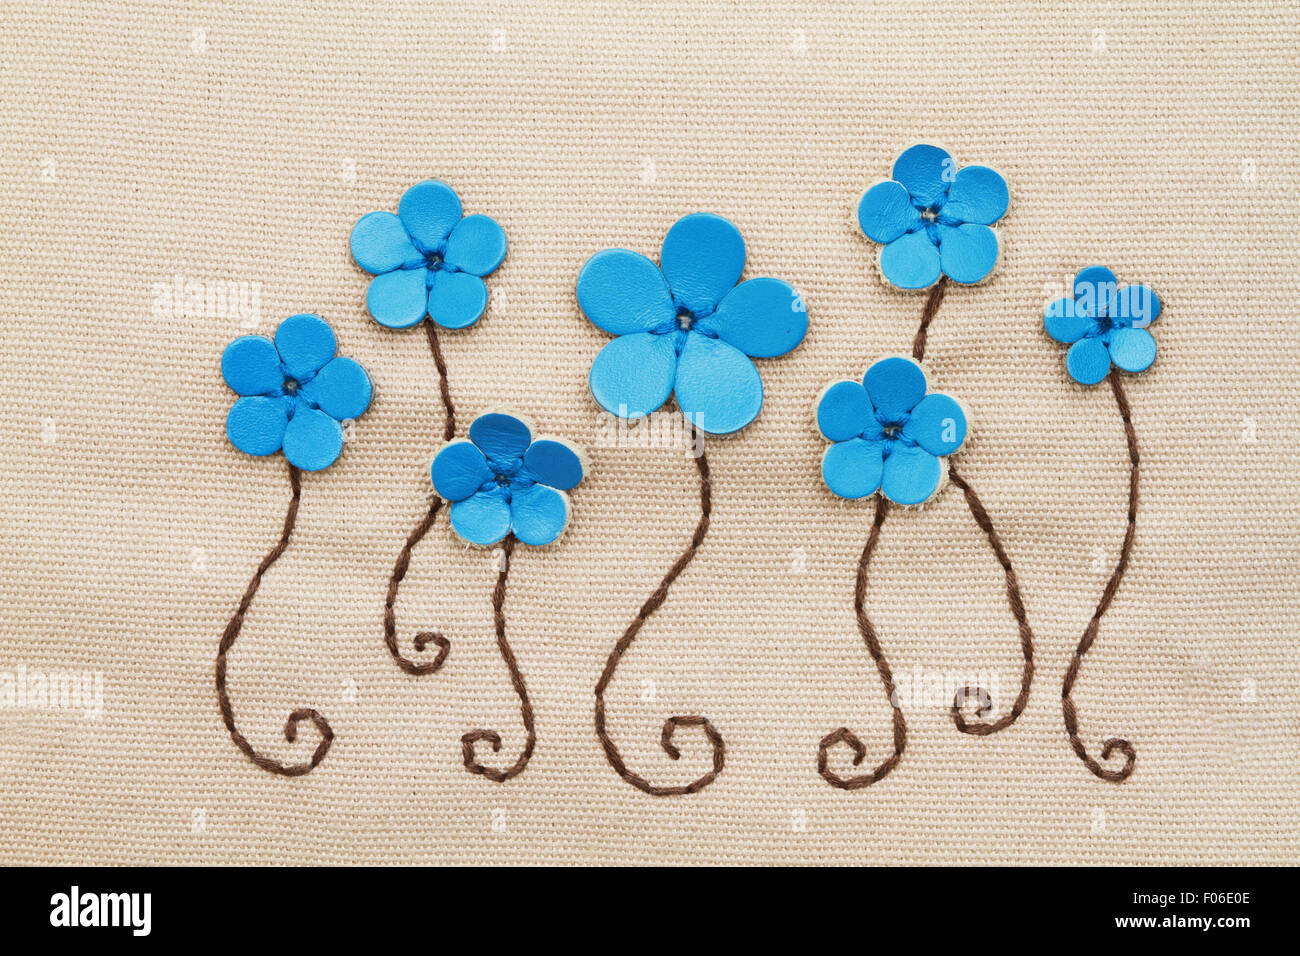 Embroidery pattern on fabric Stock Photo